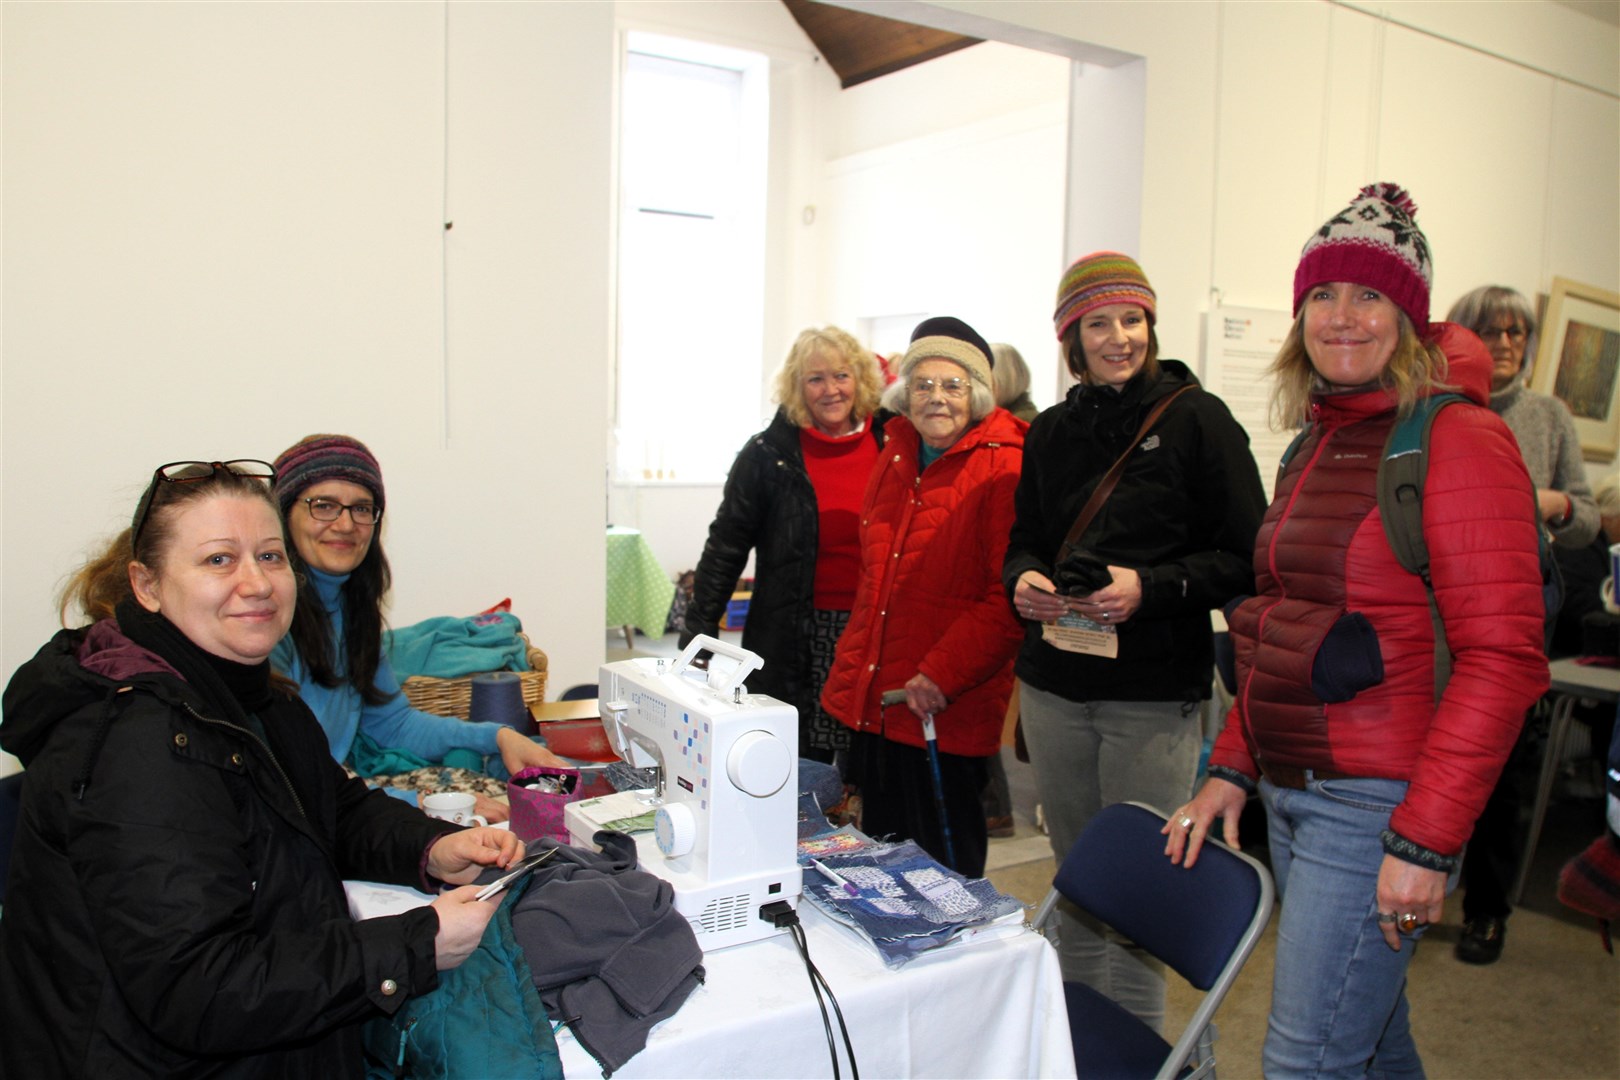 IN GOOD REPAIR: Repair Cafe Cairgorms volunteers Claire Macdonald (back left) and Iryna Yednak (front left) with visitors to their table.